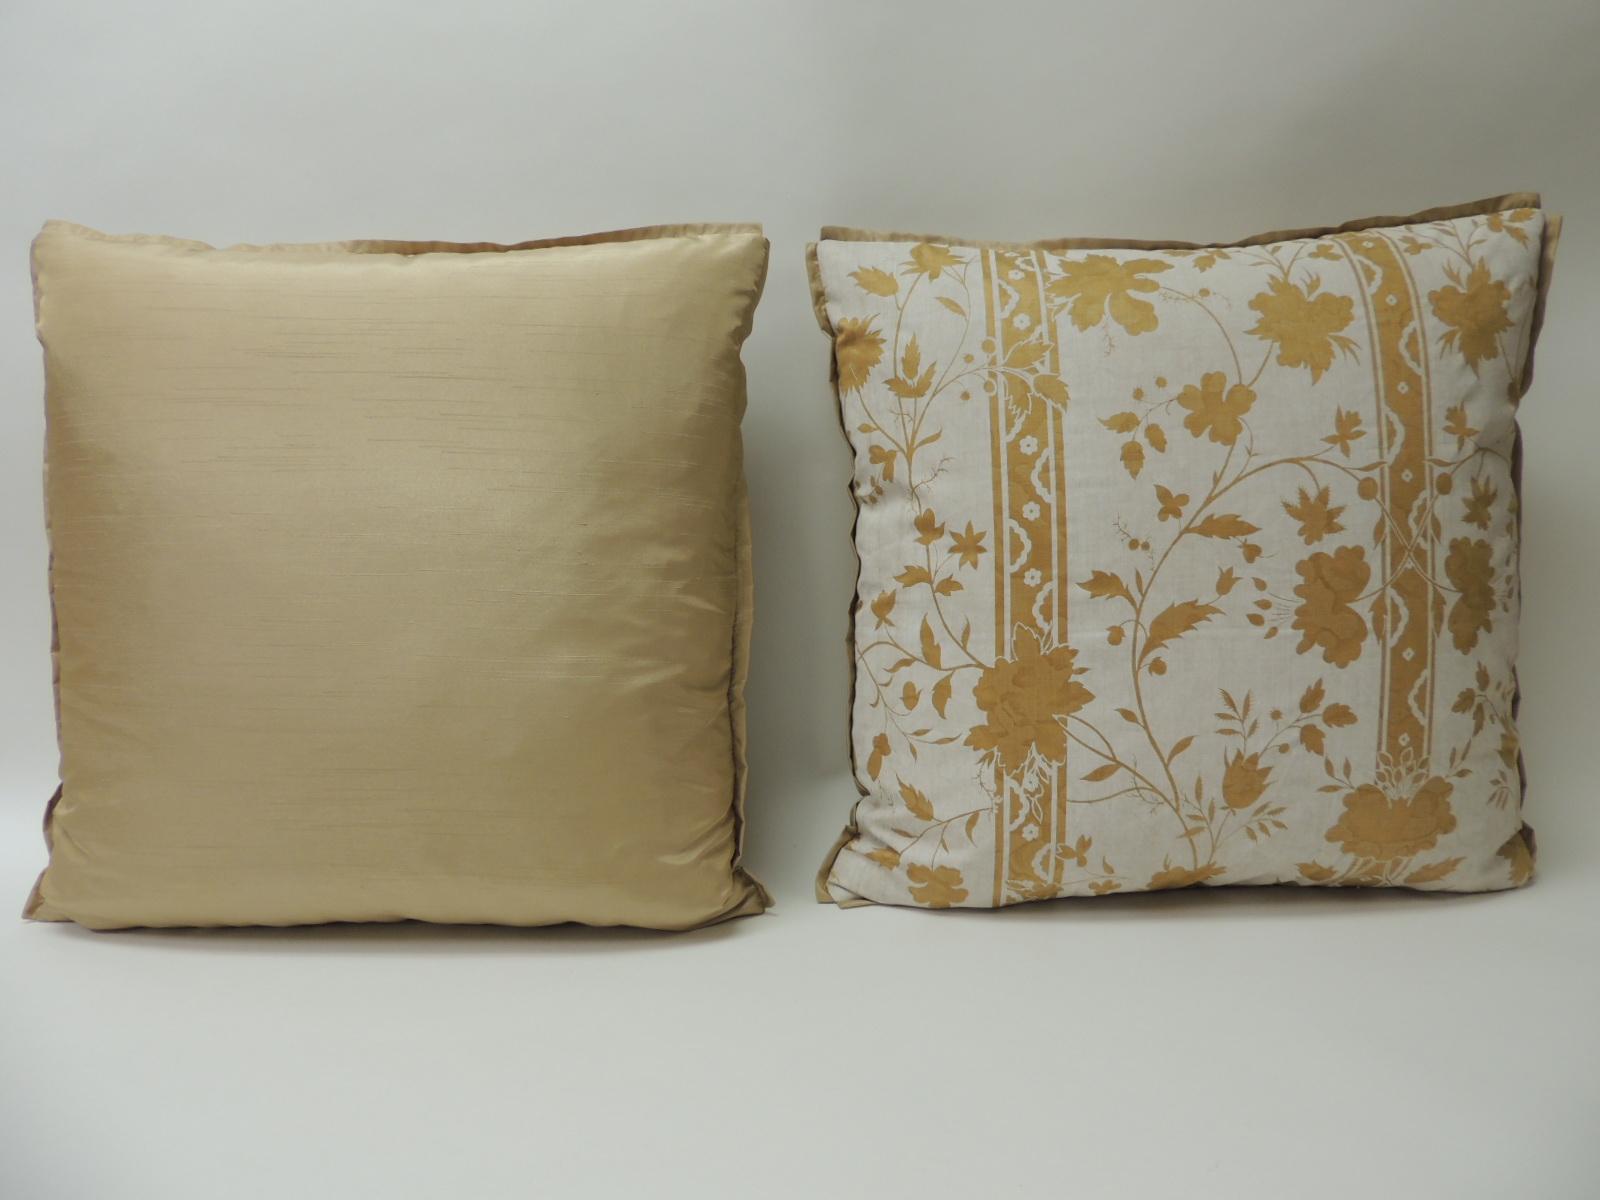 Hand-Crafted Pair of Vintage Yellow & Natural Fortuny Stripes and Flowers Decorative Pillows